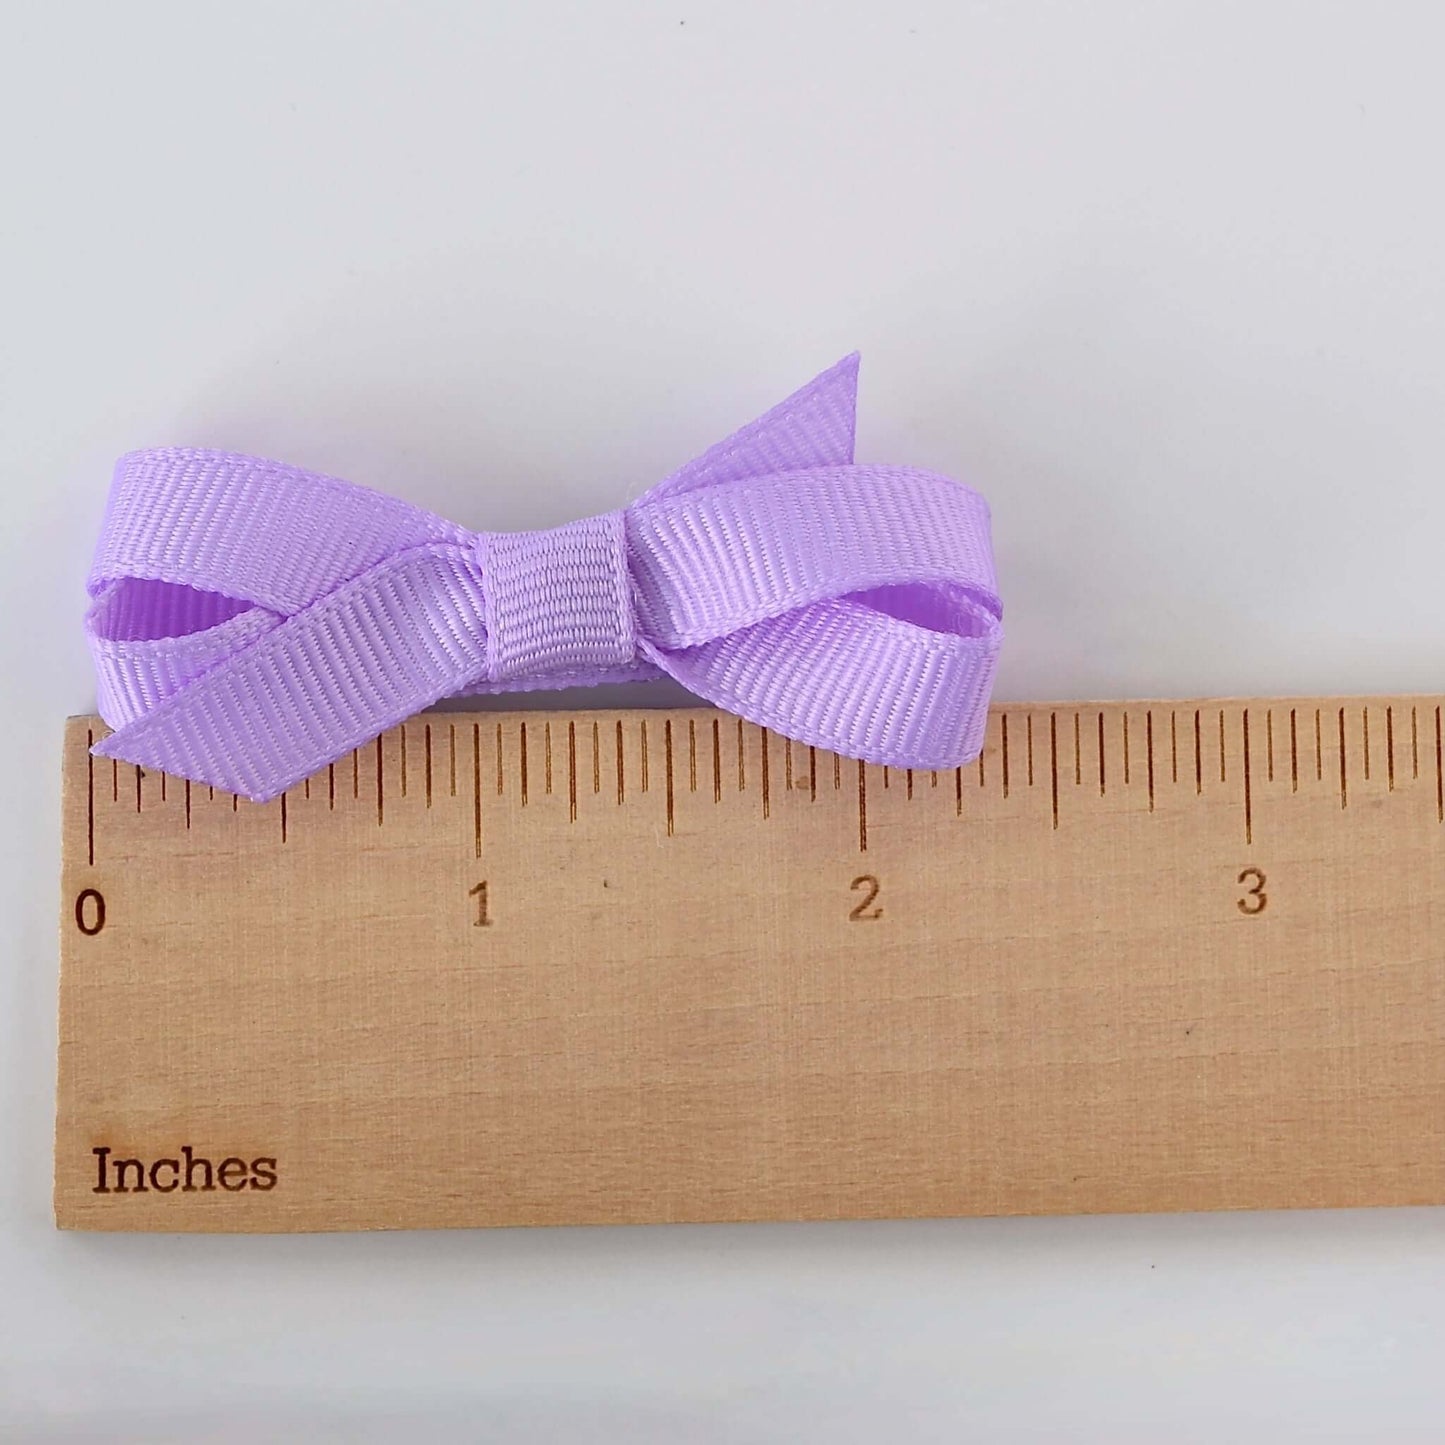 Mini grosgrain bow for babies and toddler girls on a ruler for size reference.